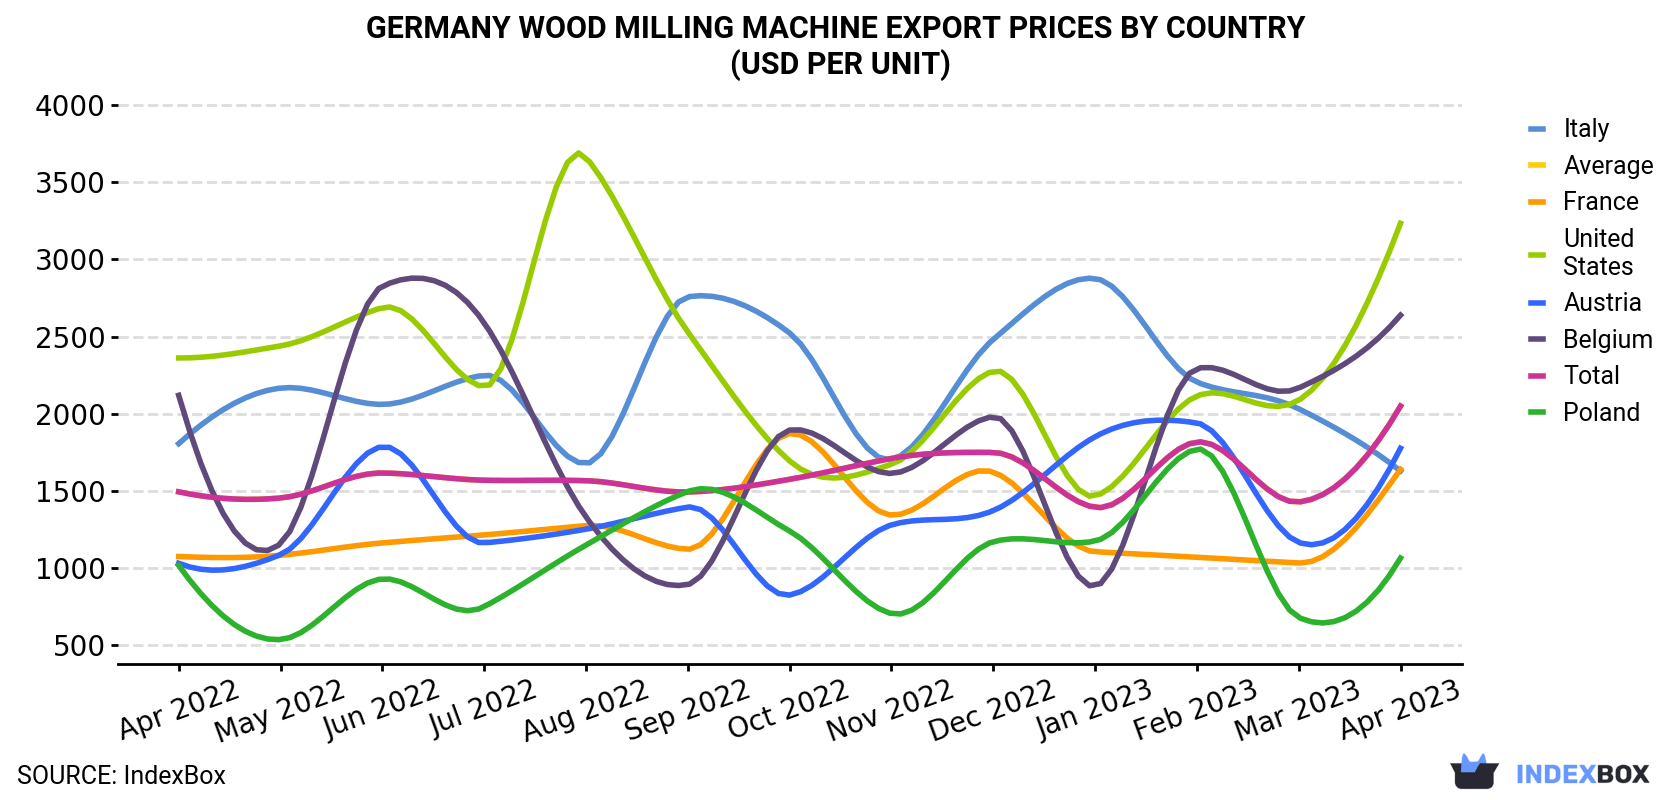 Germany Wood Milling Machine Export Prices By Country (USD Per Unit)